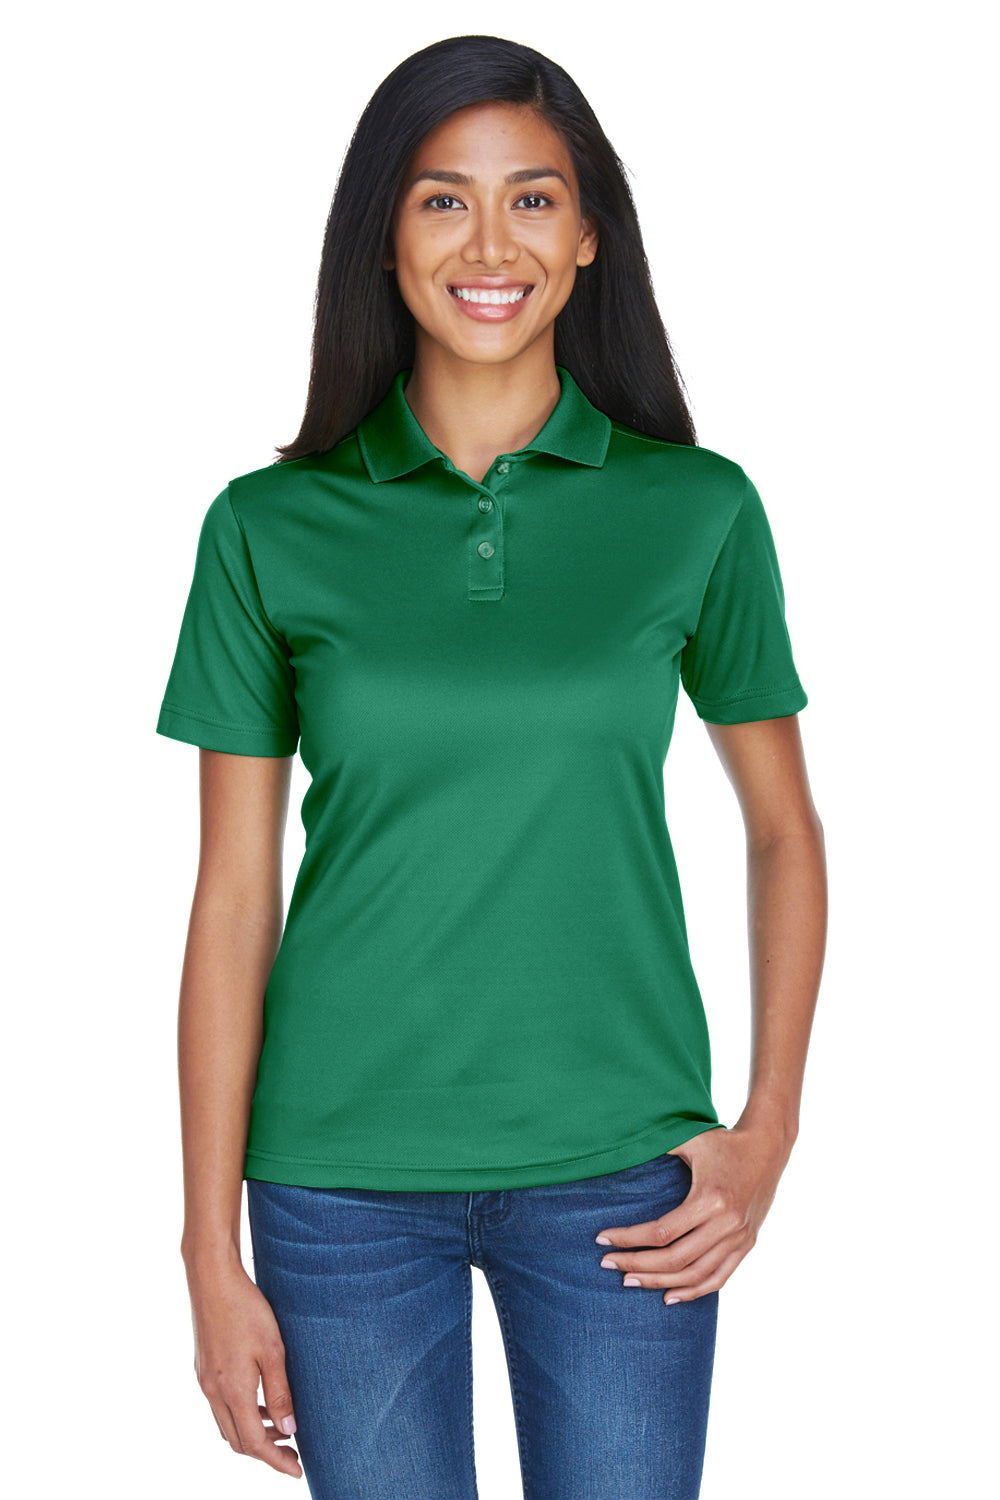 UltraClub 8404 Womens Cool & Dry Moisture Wicking Short Sleeve Polo Shirt Forest Green Front